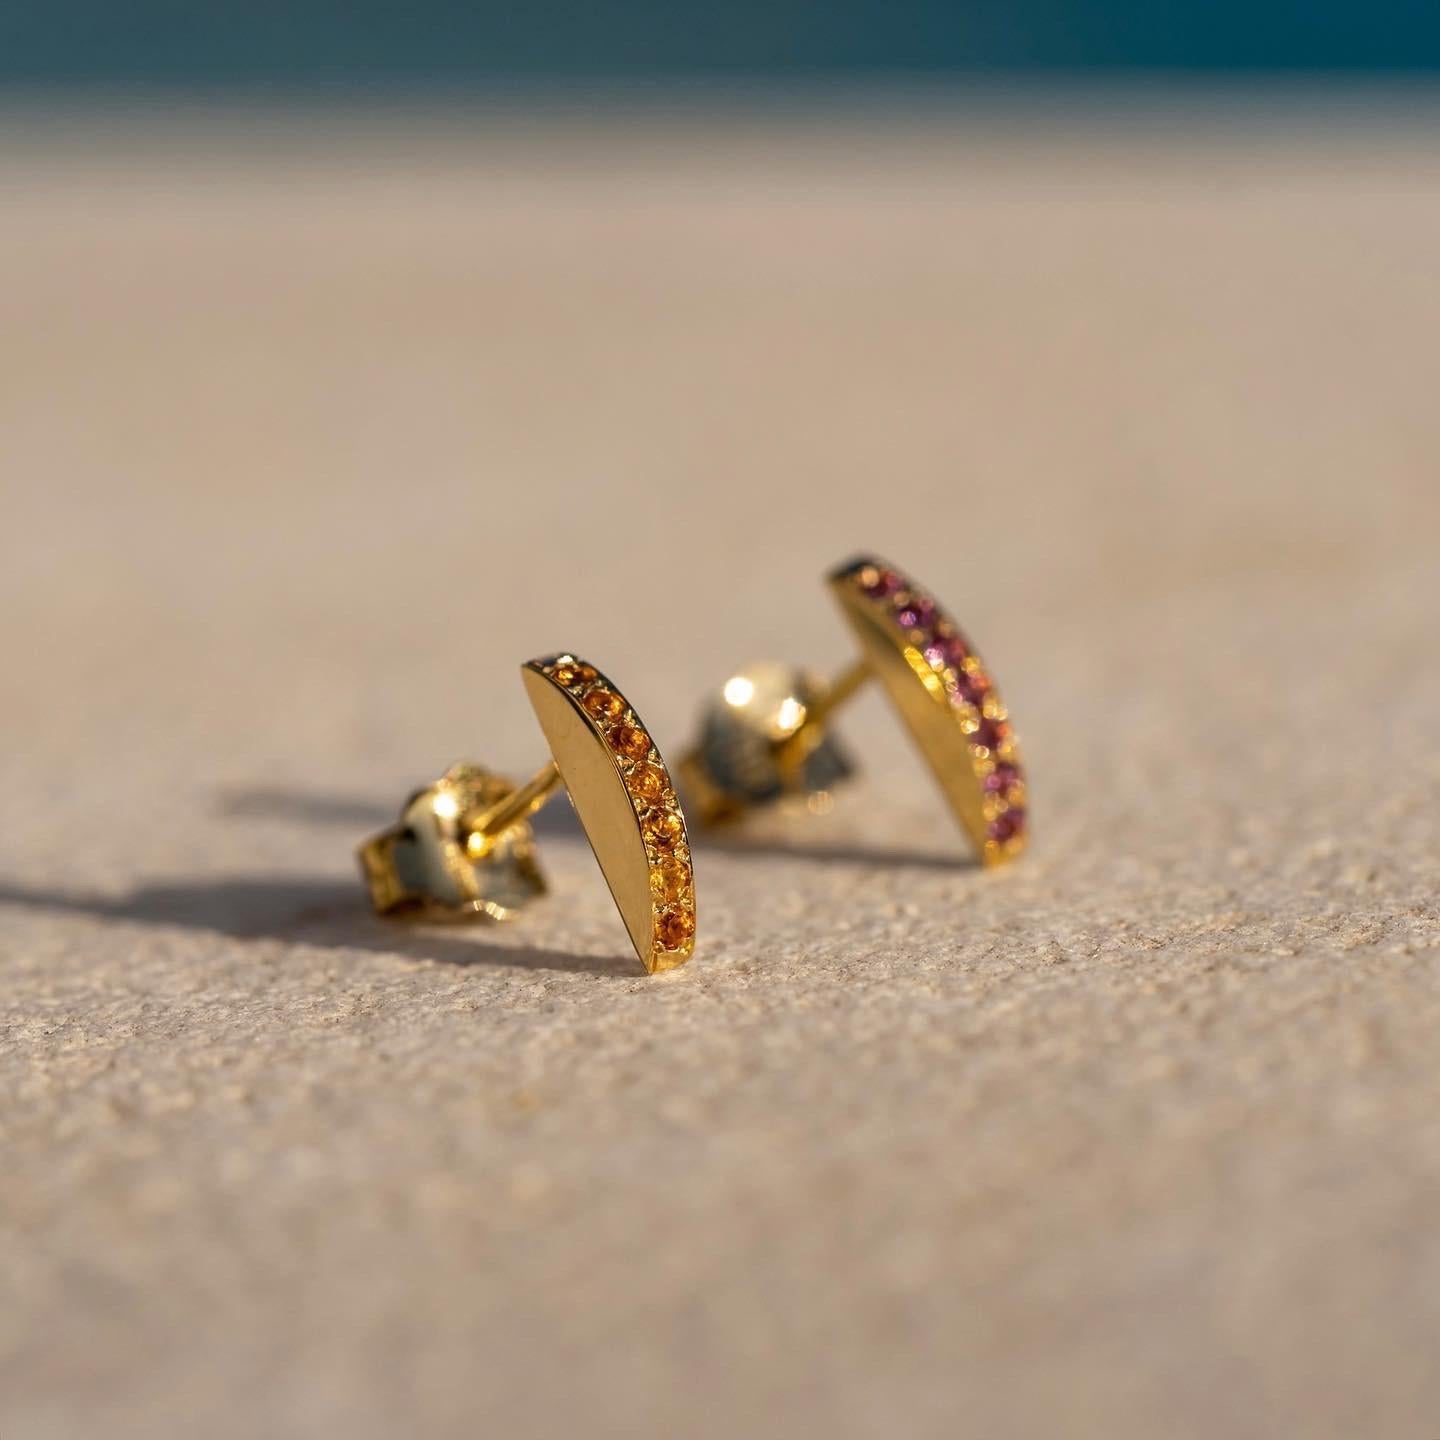 The 'Section’, studs are crafted in 18k gold, hallmarked in Cyprus. These discreetly impressive, super cute studs come in a highly polished finish and feature Madeira Citrines totalling 0.14 Cts. Worn separately or stacked, these versatile studs can